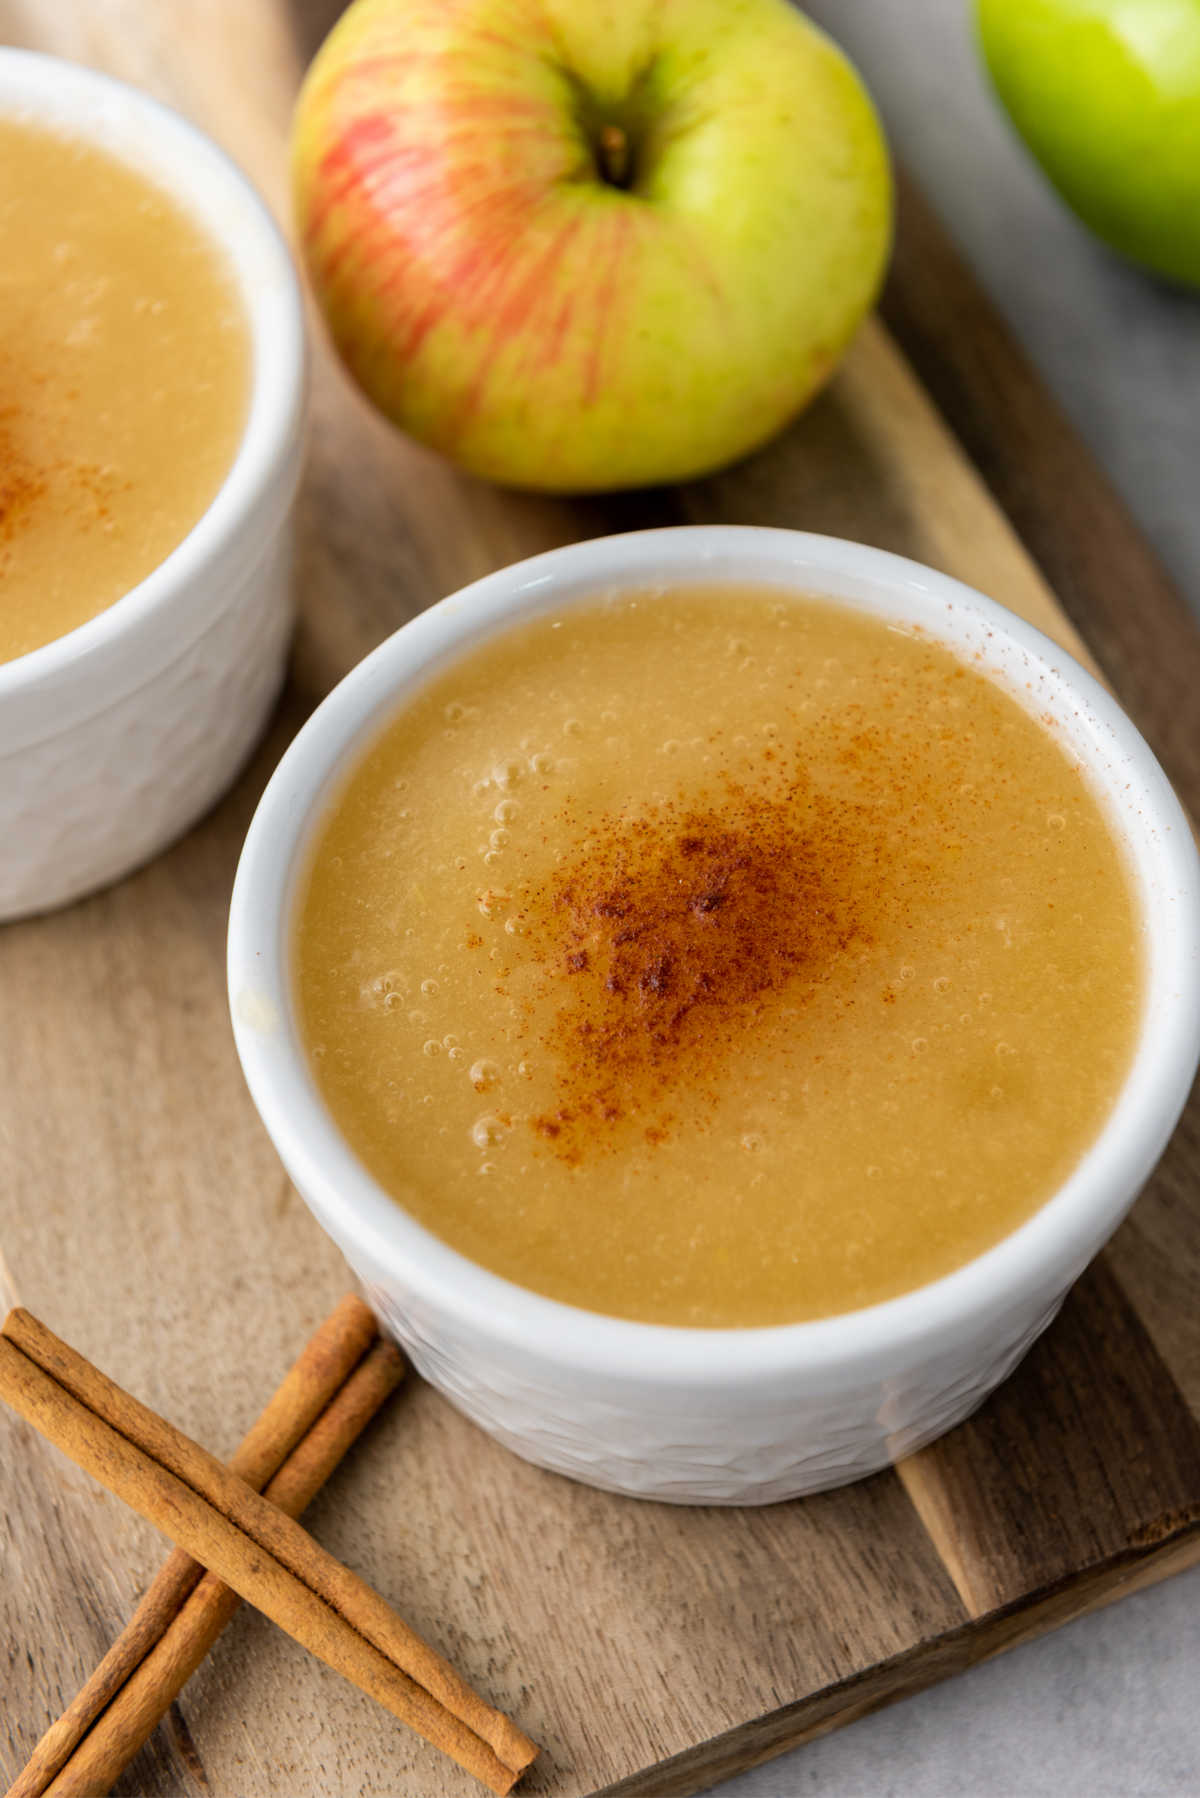 Two bowls of smooth applesauce topped with a little bit of cinnamon, ready to eat.